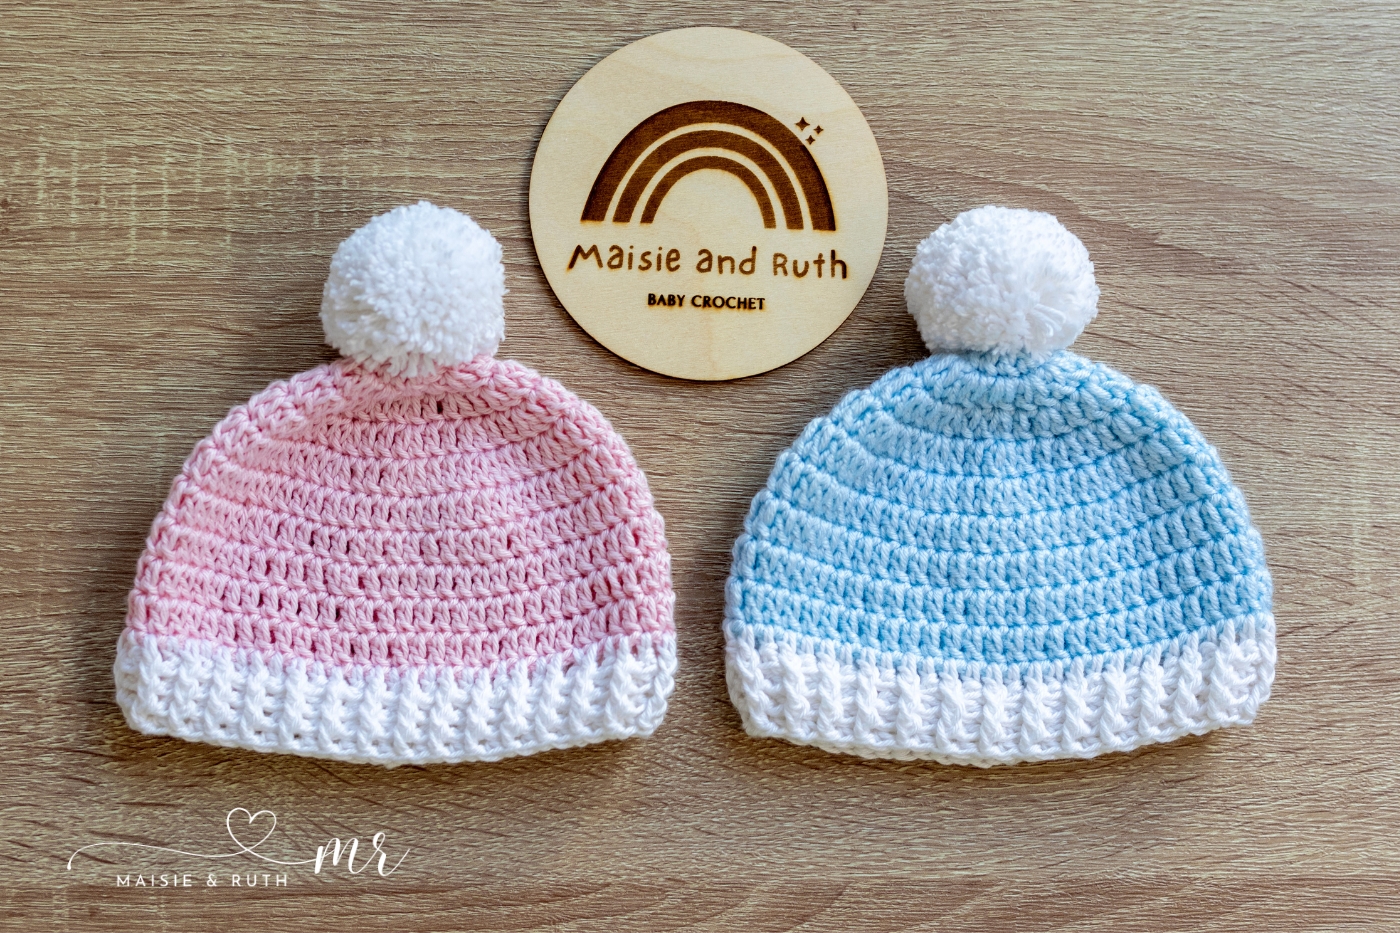 two toned crochet baby hat in pink and blue